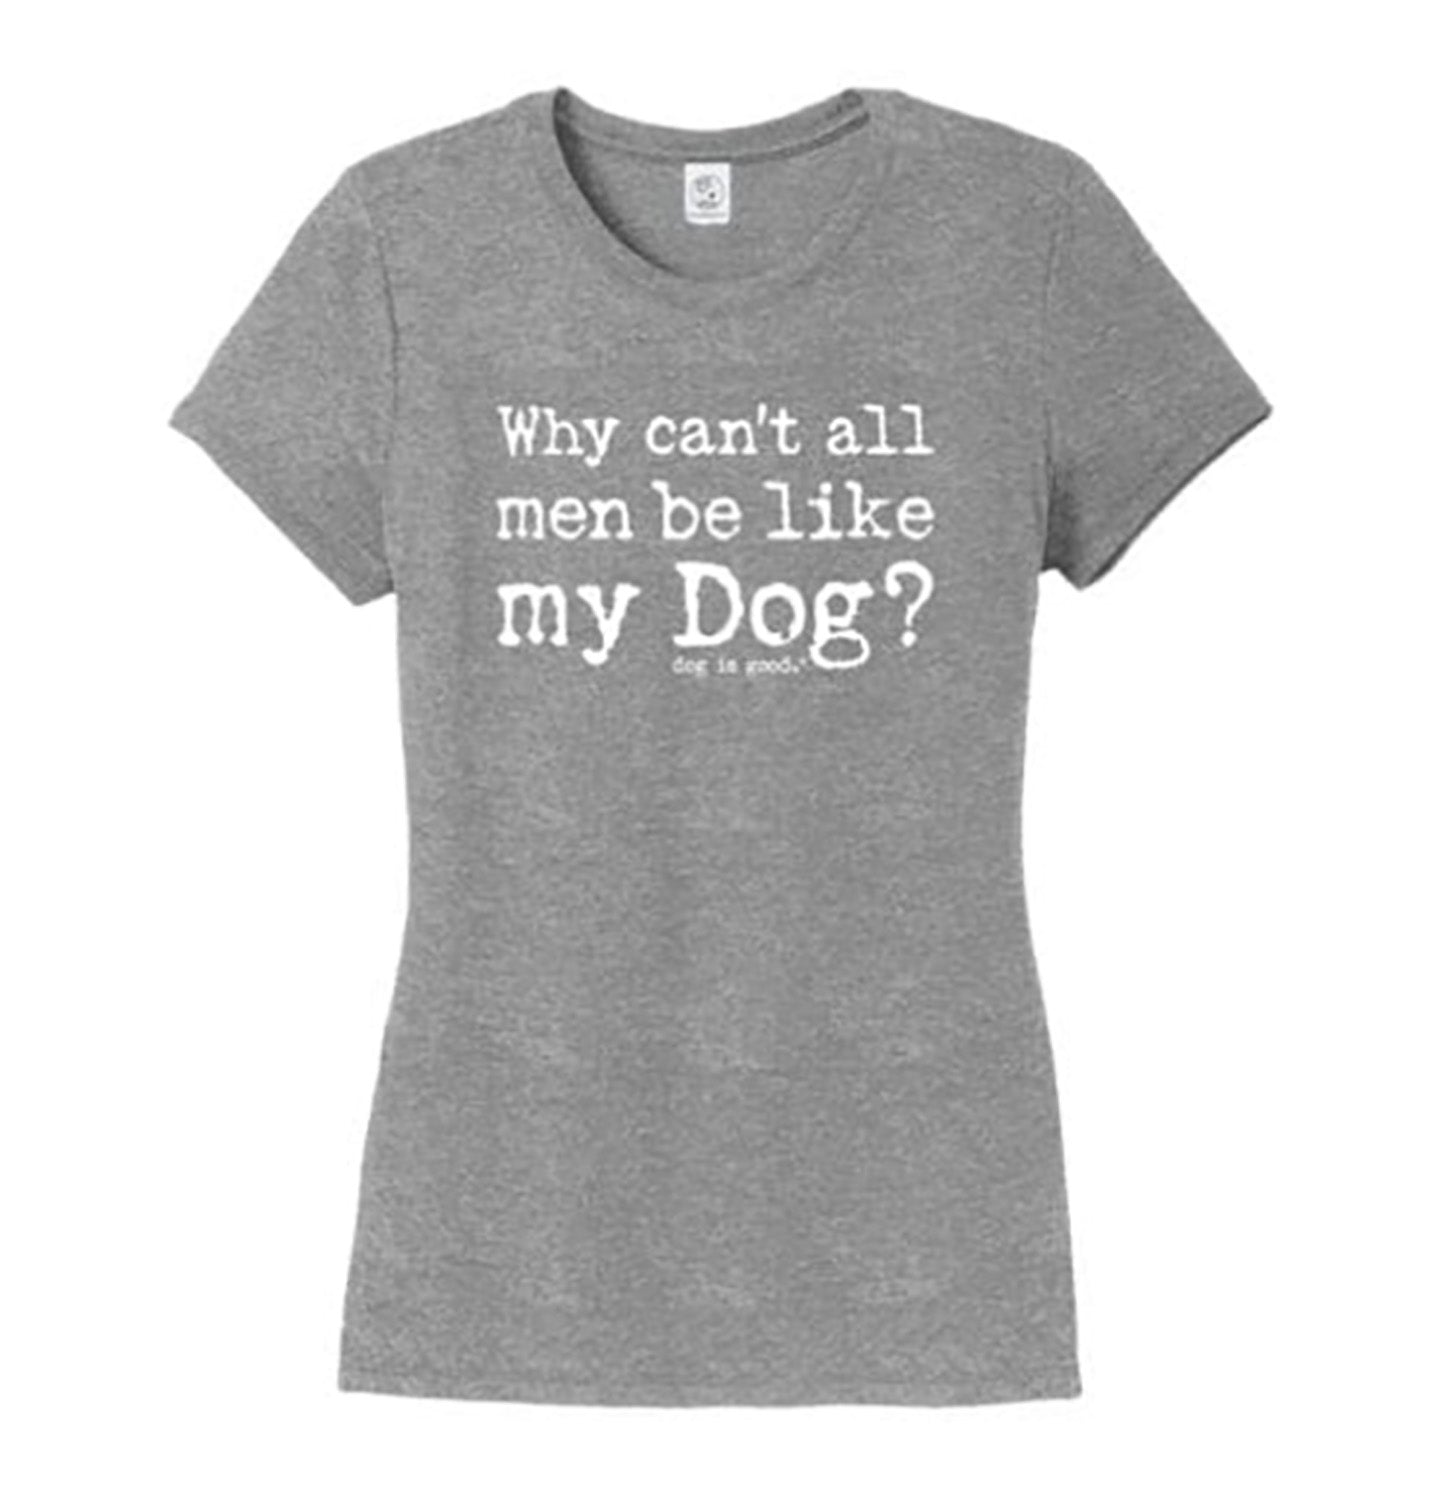 Dog Is Good - Why Can't All Men Be Like My Dog - Women's T-Shirt